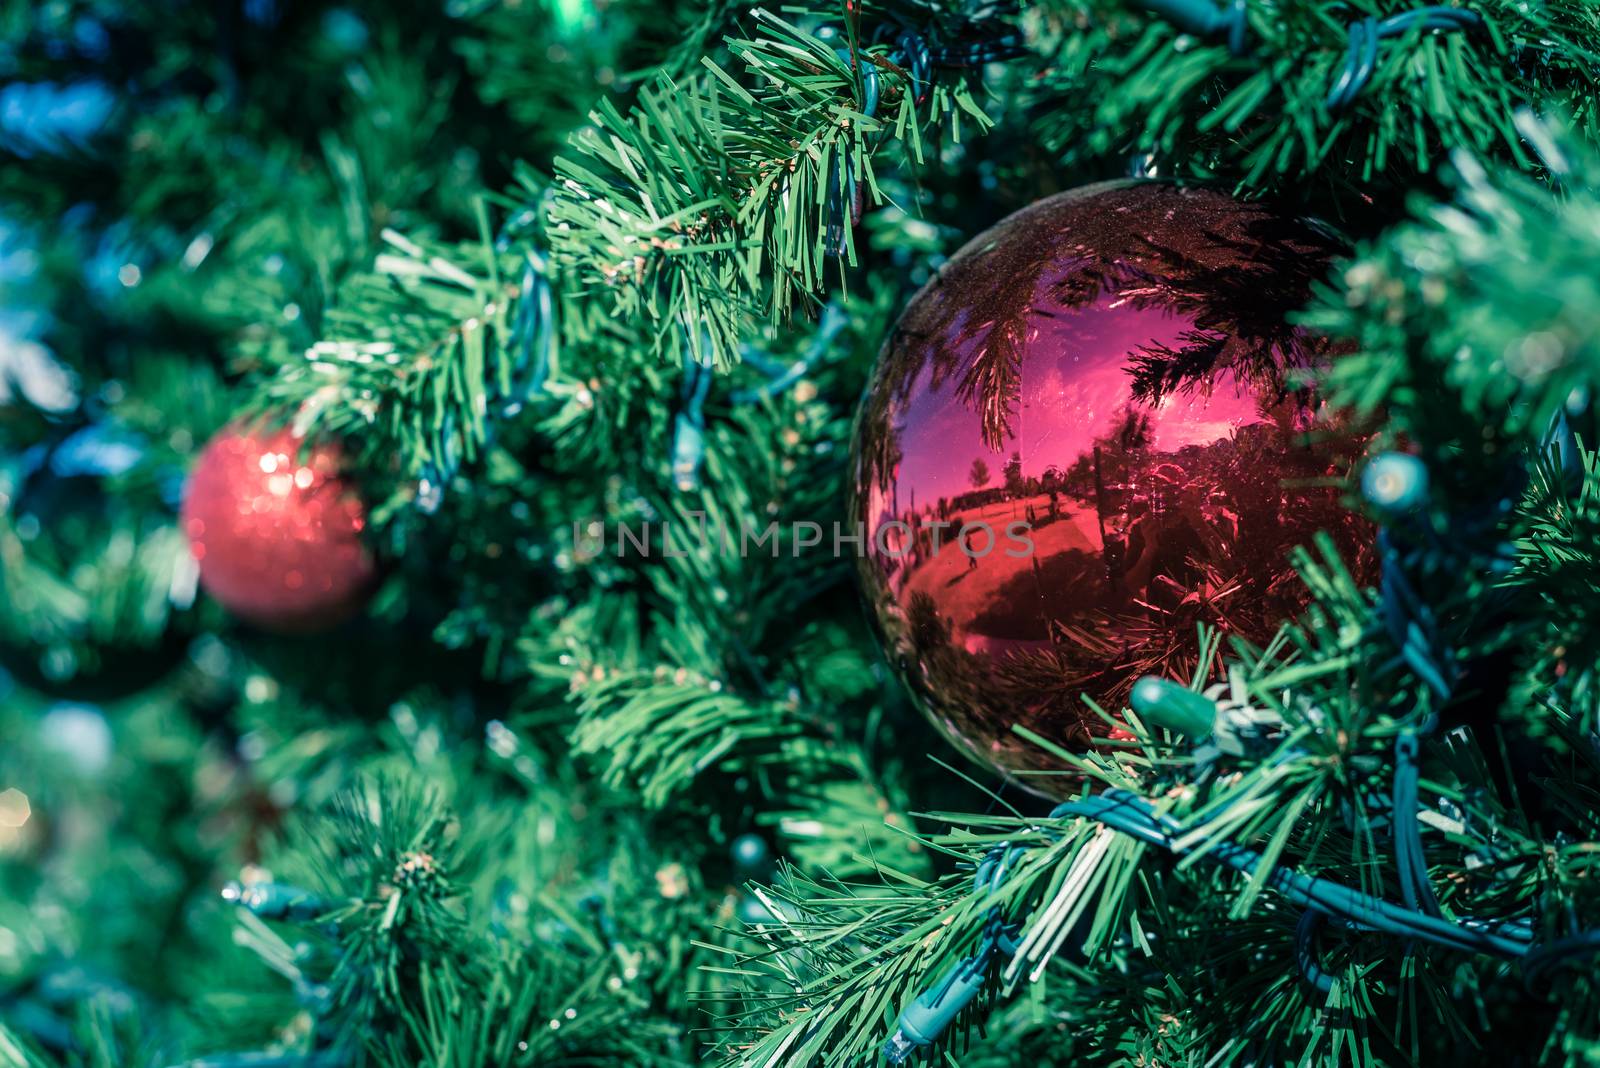 Filtered image red ball ornament hanging on Christmas pine branches at daytime light close-up by trongnguyen